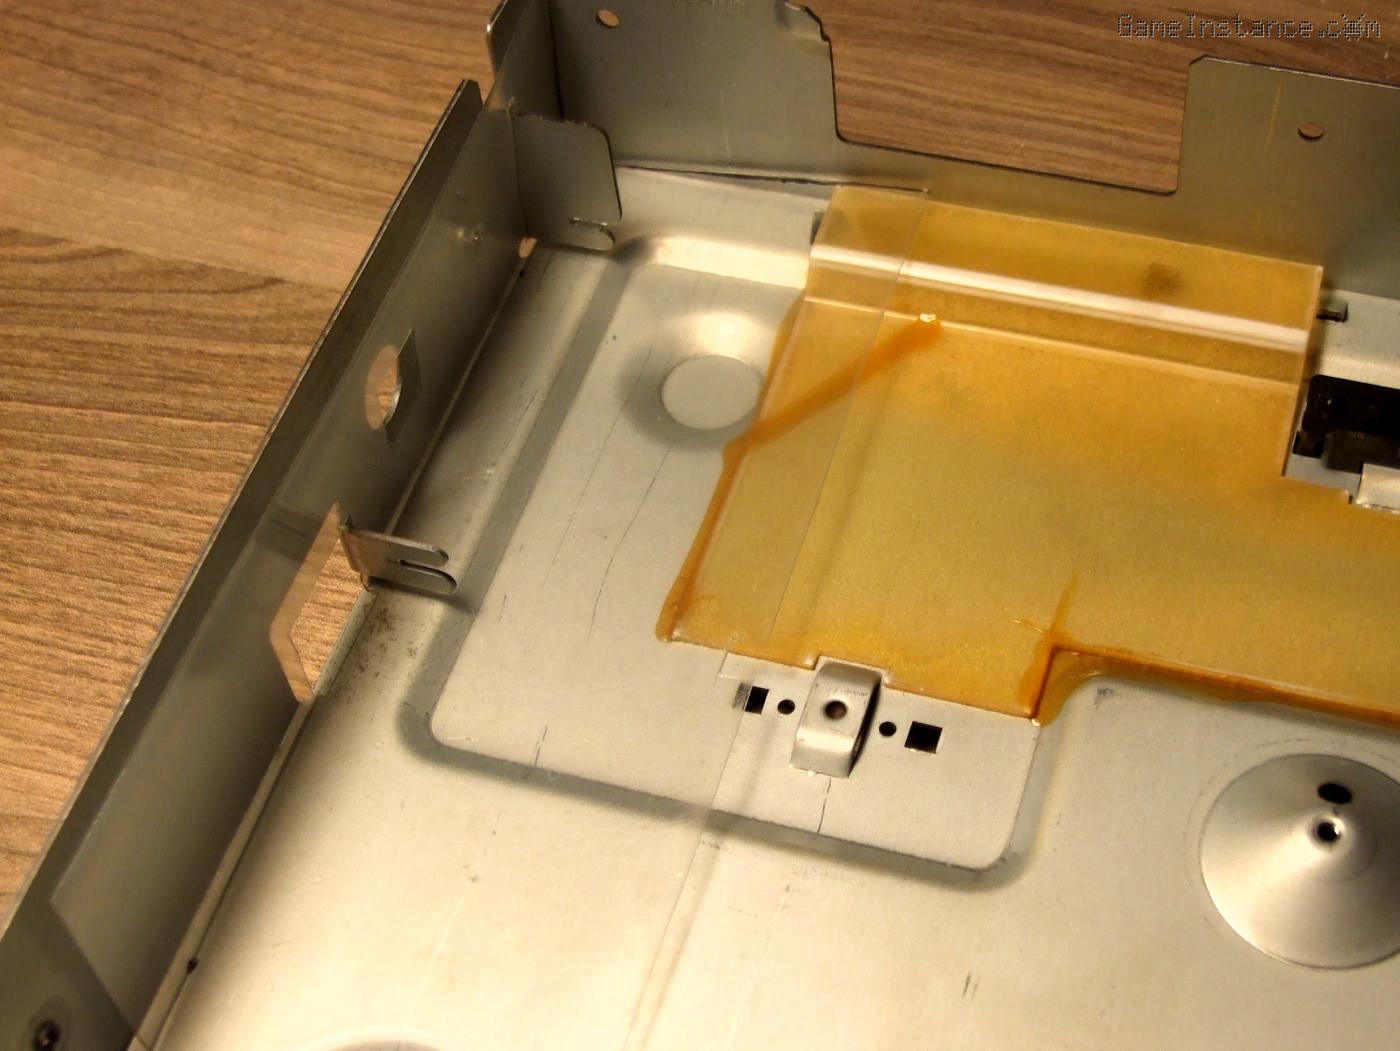 ST-S505 bottom case piece: punched-out PCB clamps creating a micro-SD card sized opening